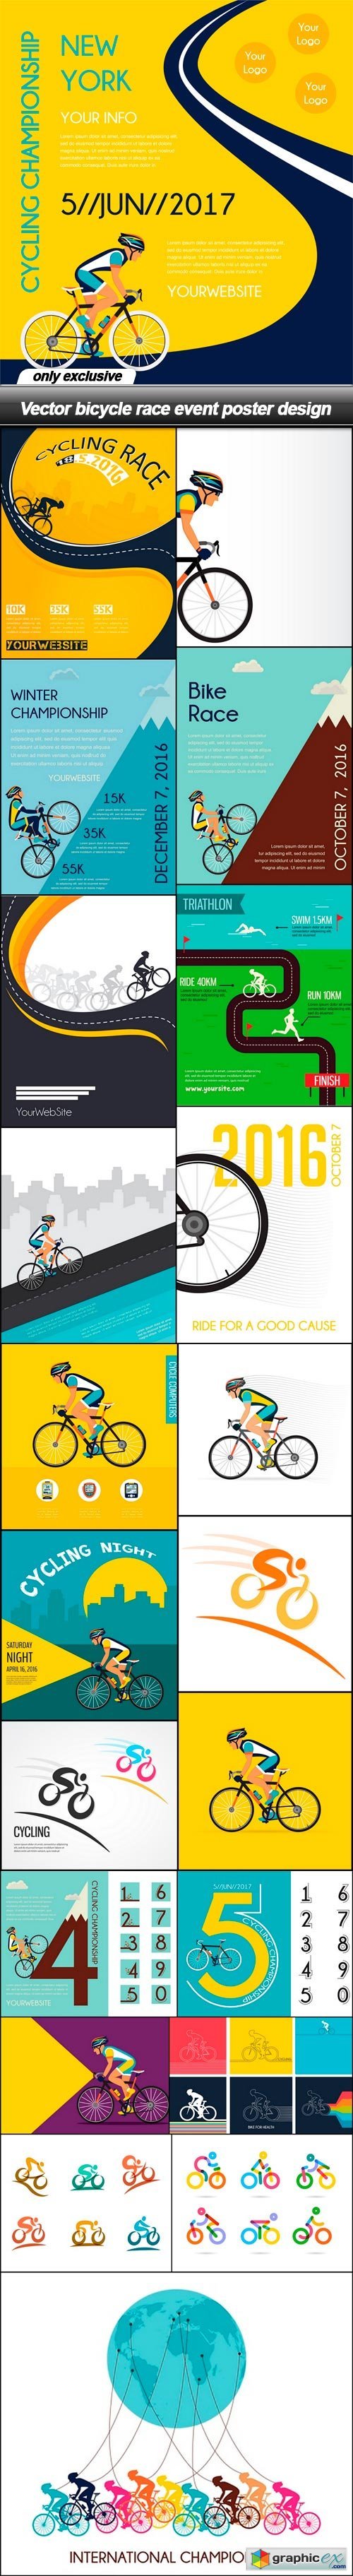 Bicycle race event poster design - 22 EPS